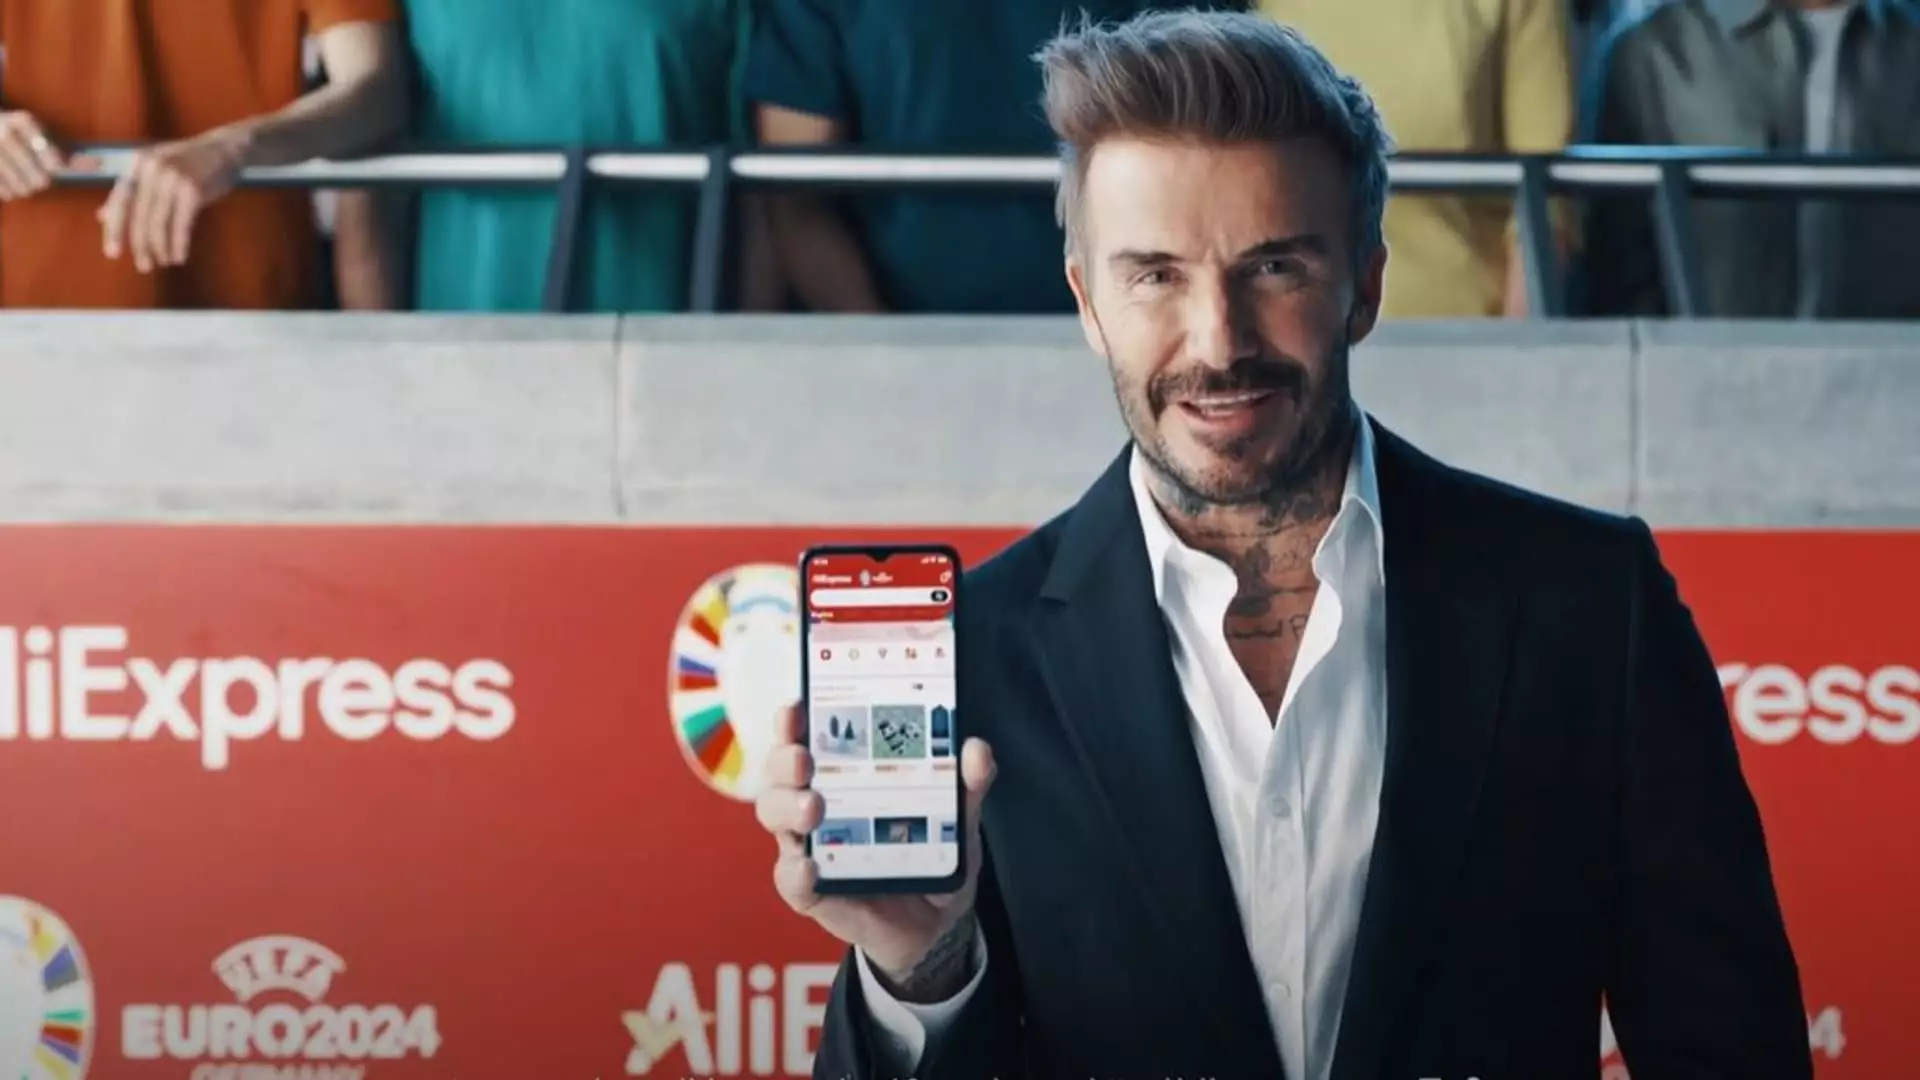 The Global Expansion of AliExpress with David Beckham